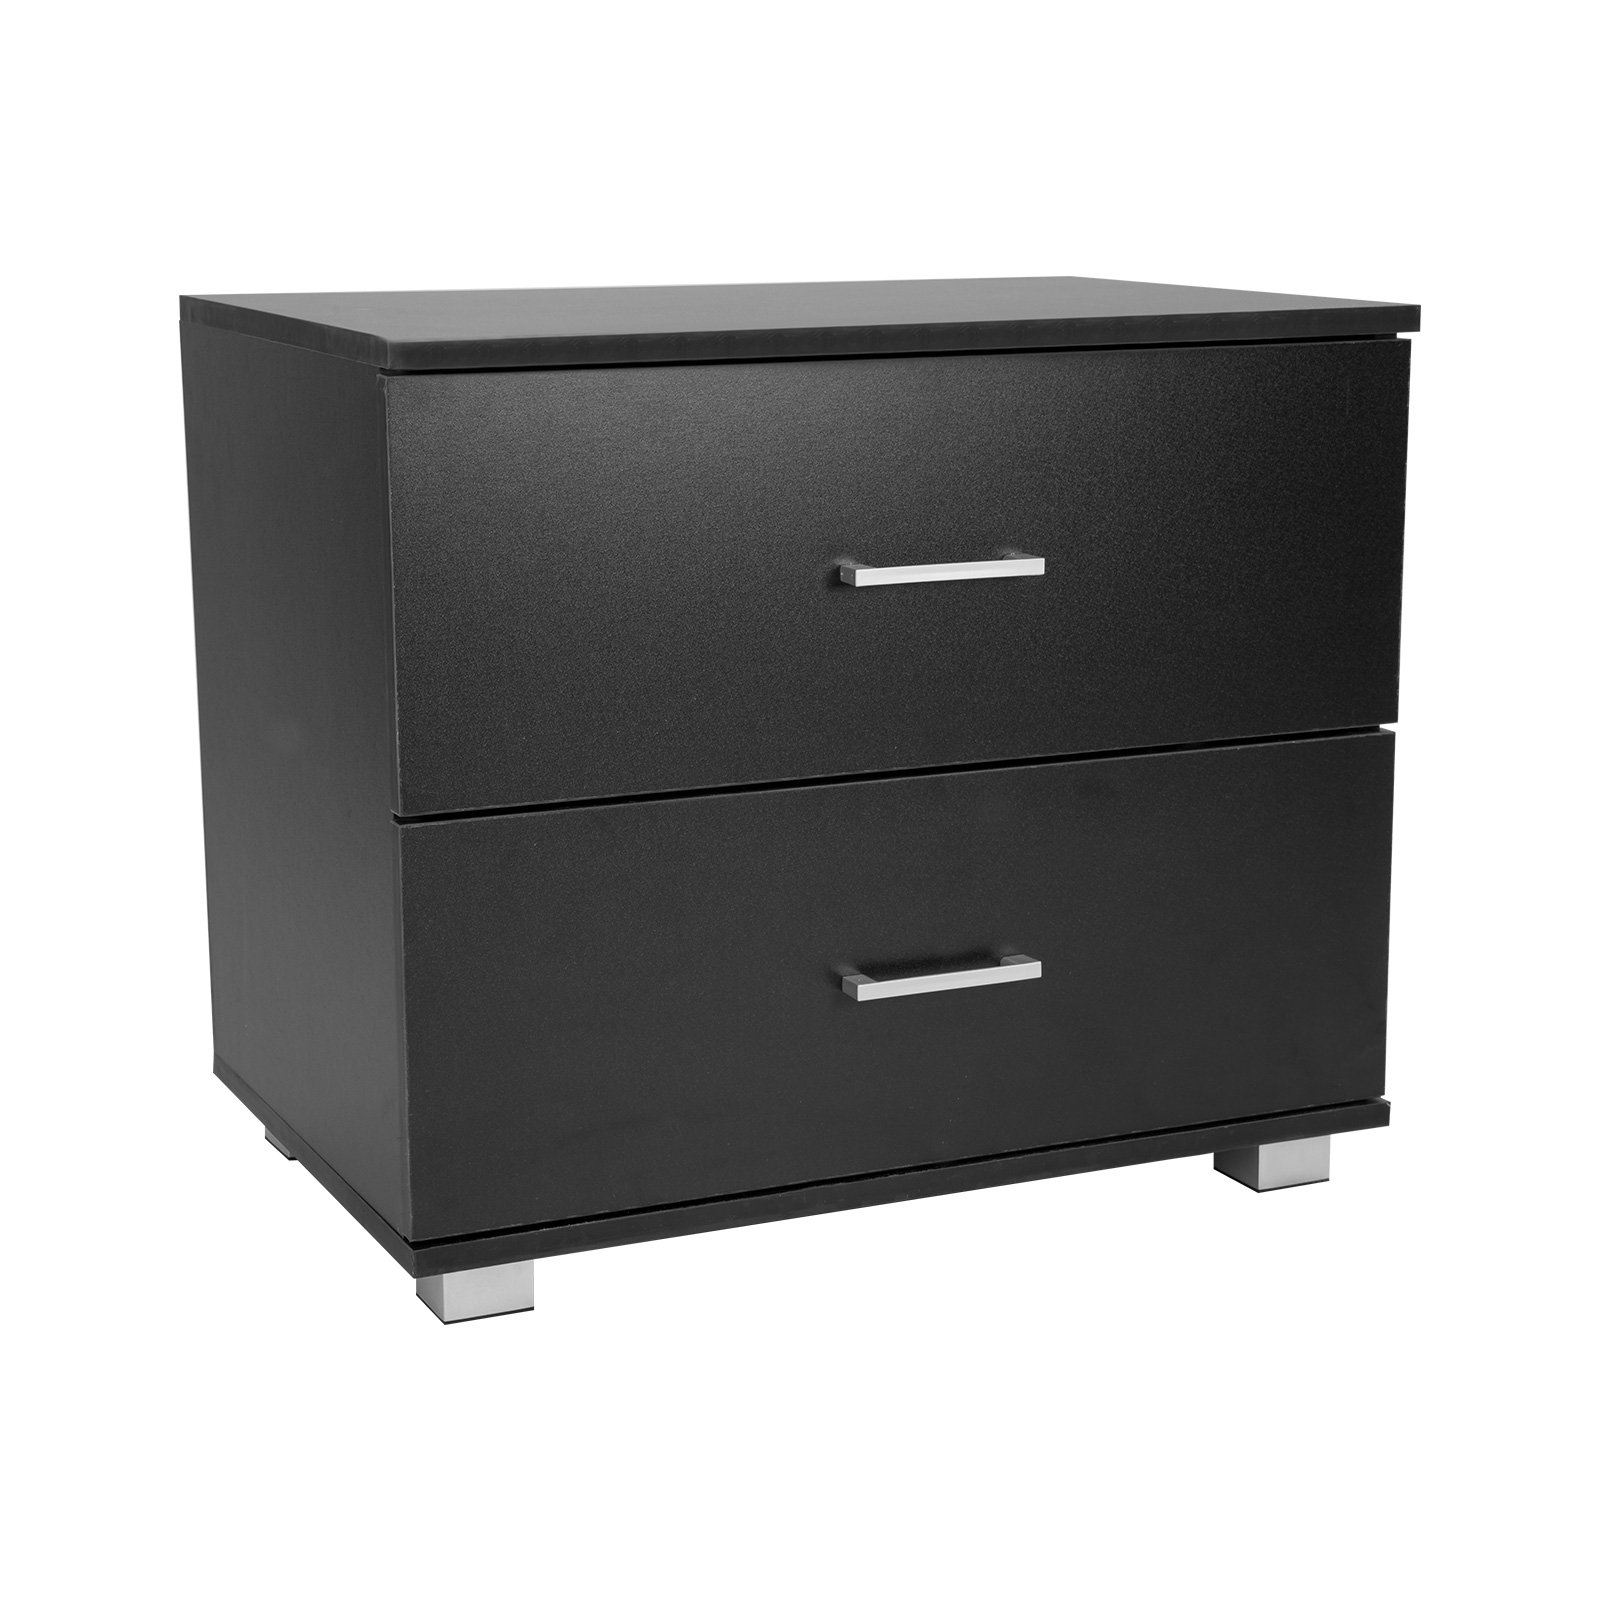 Bedside Table with Drawers MDF Wood - Black 1